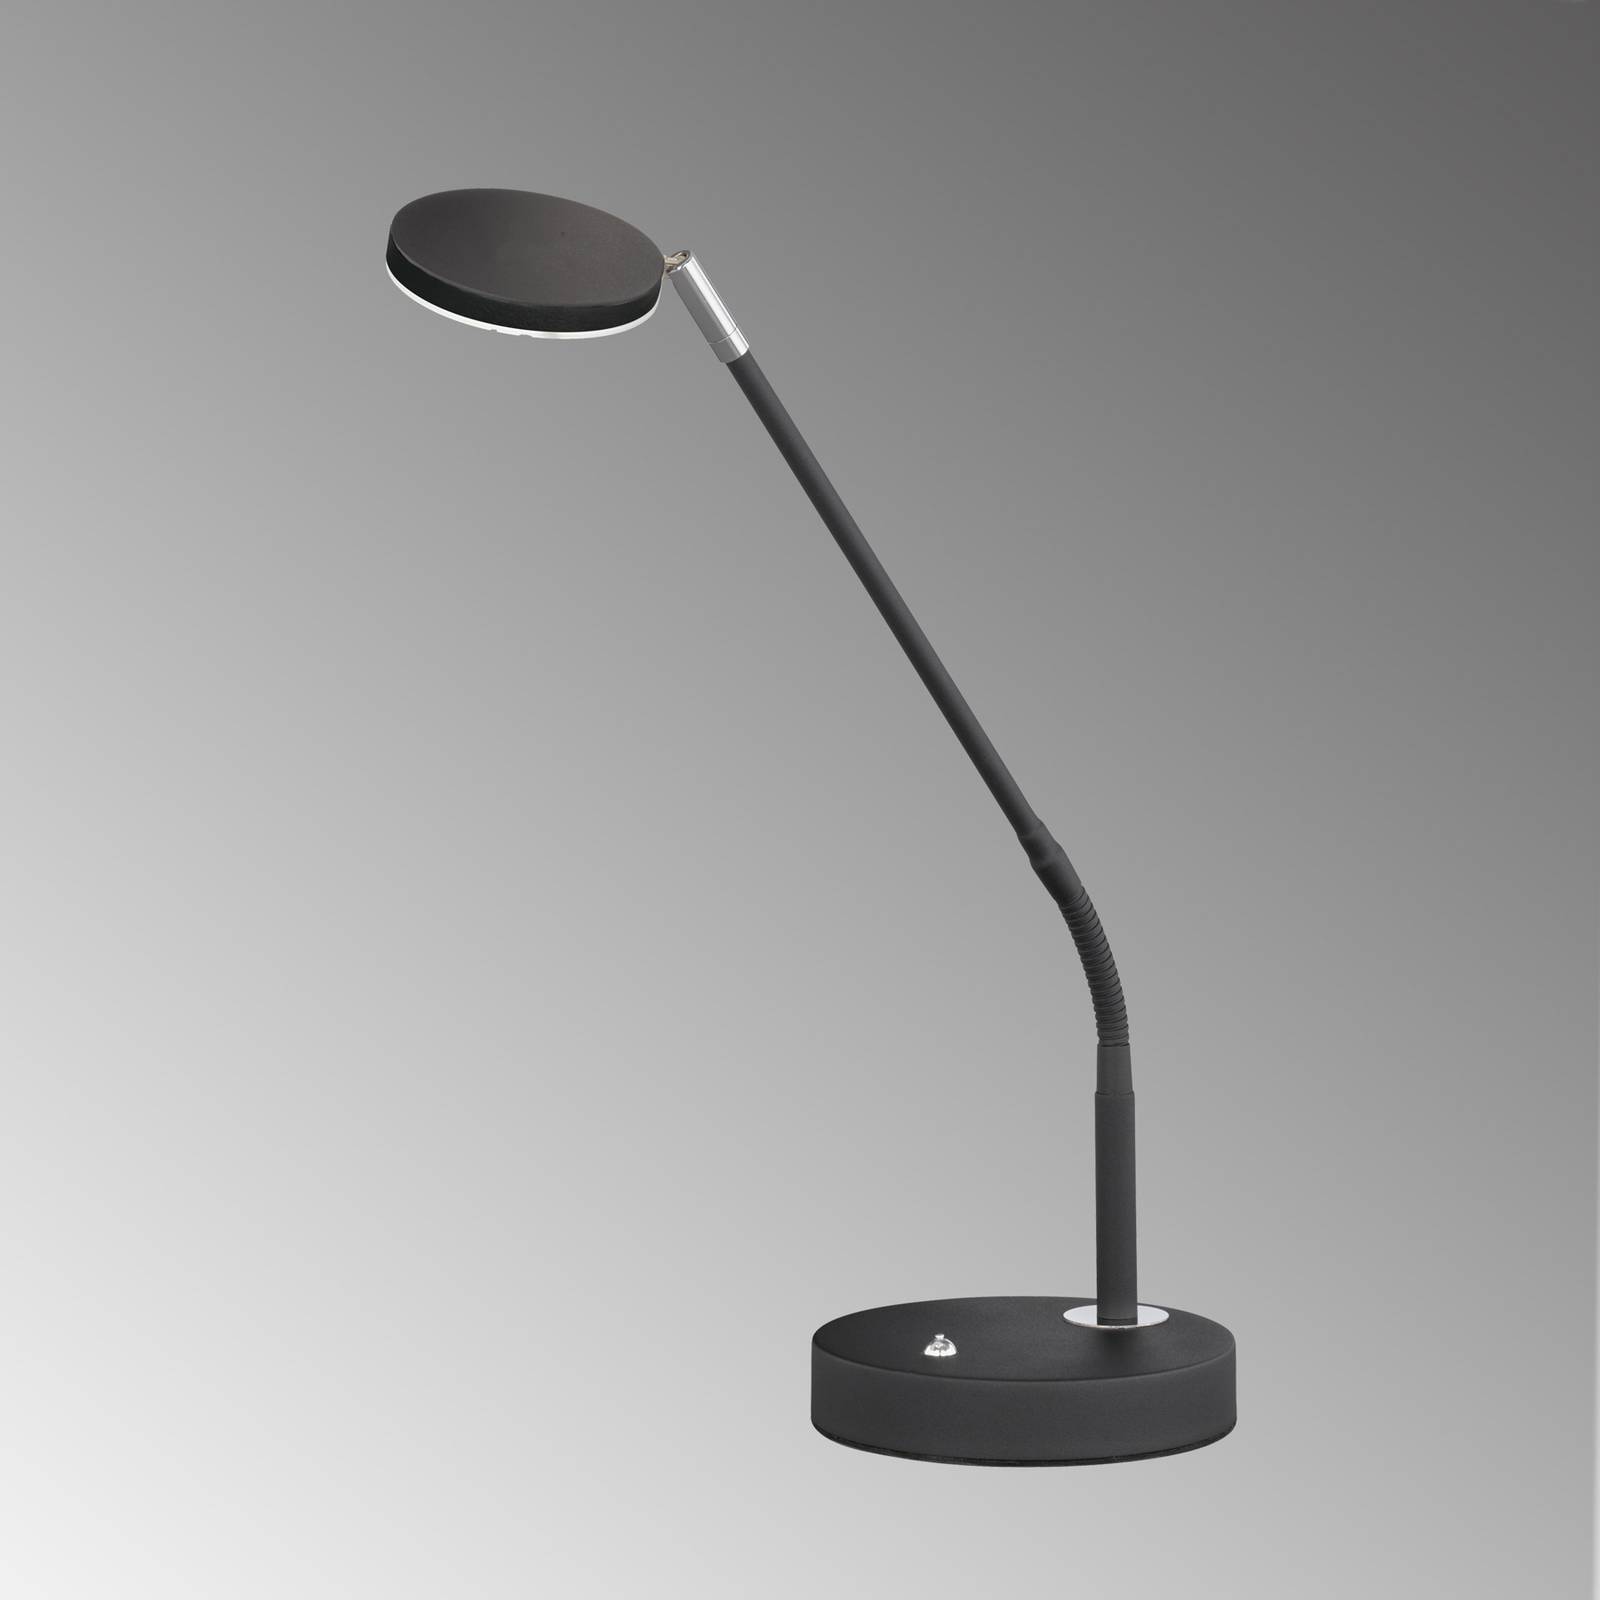 FH Lighting Lampe à poser LED Lunia, dimmable, noir sable